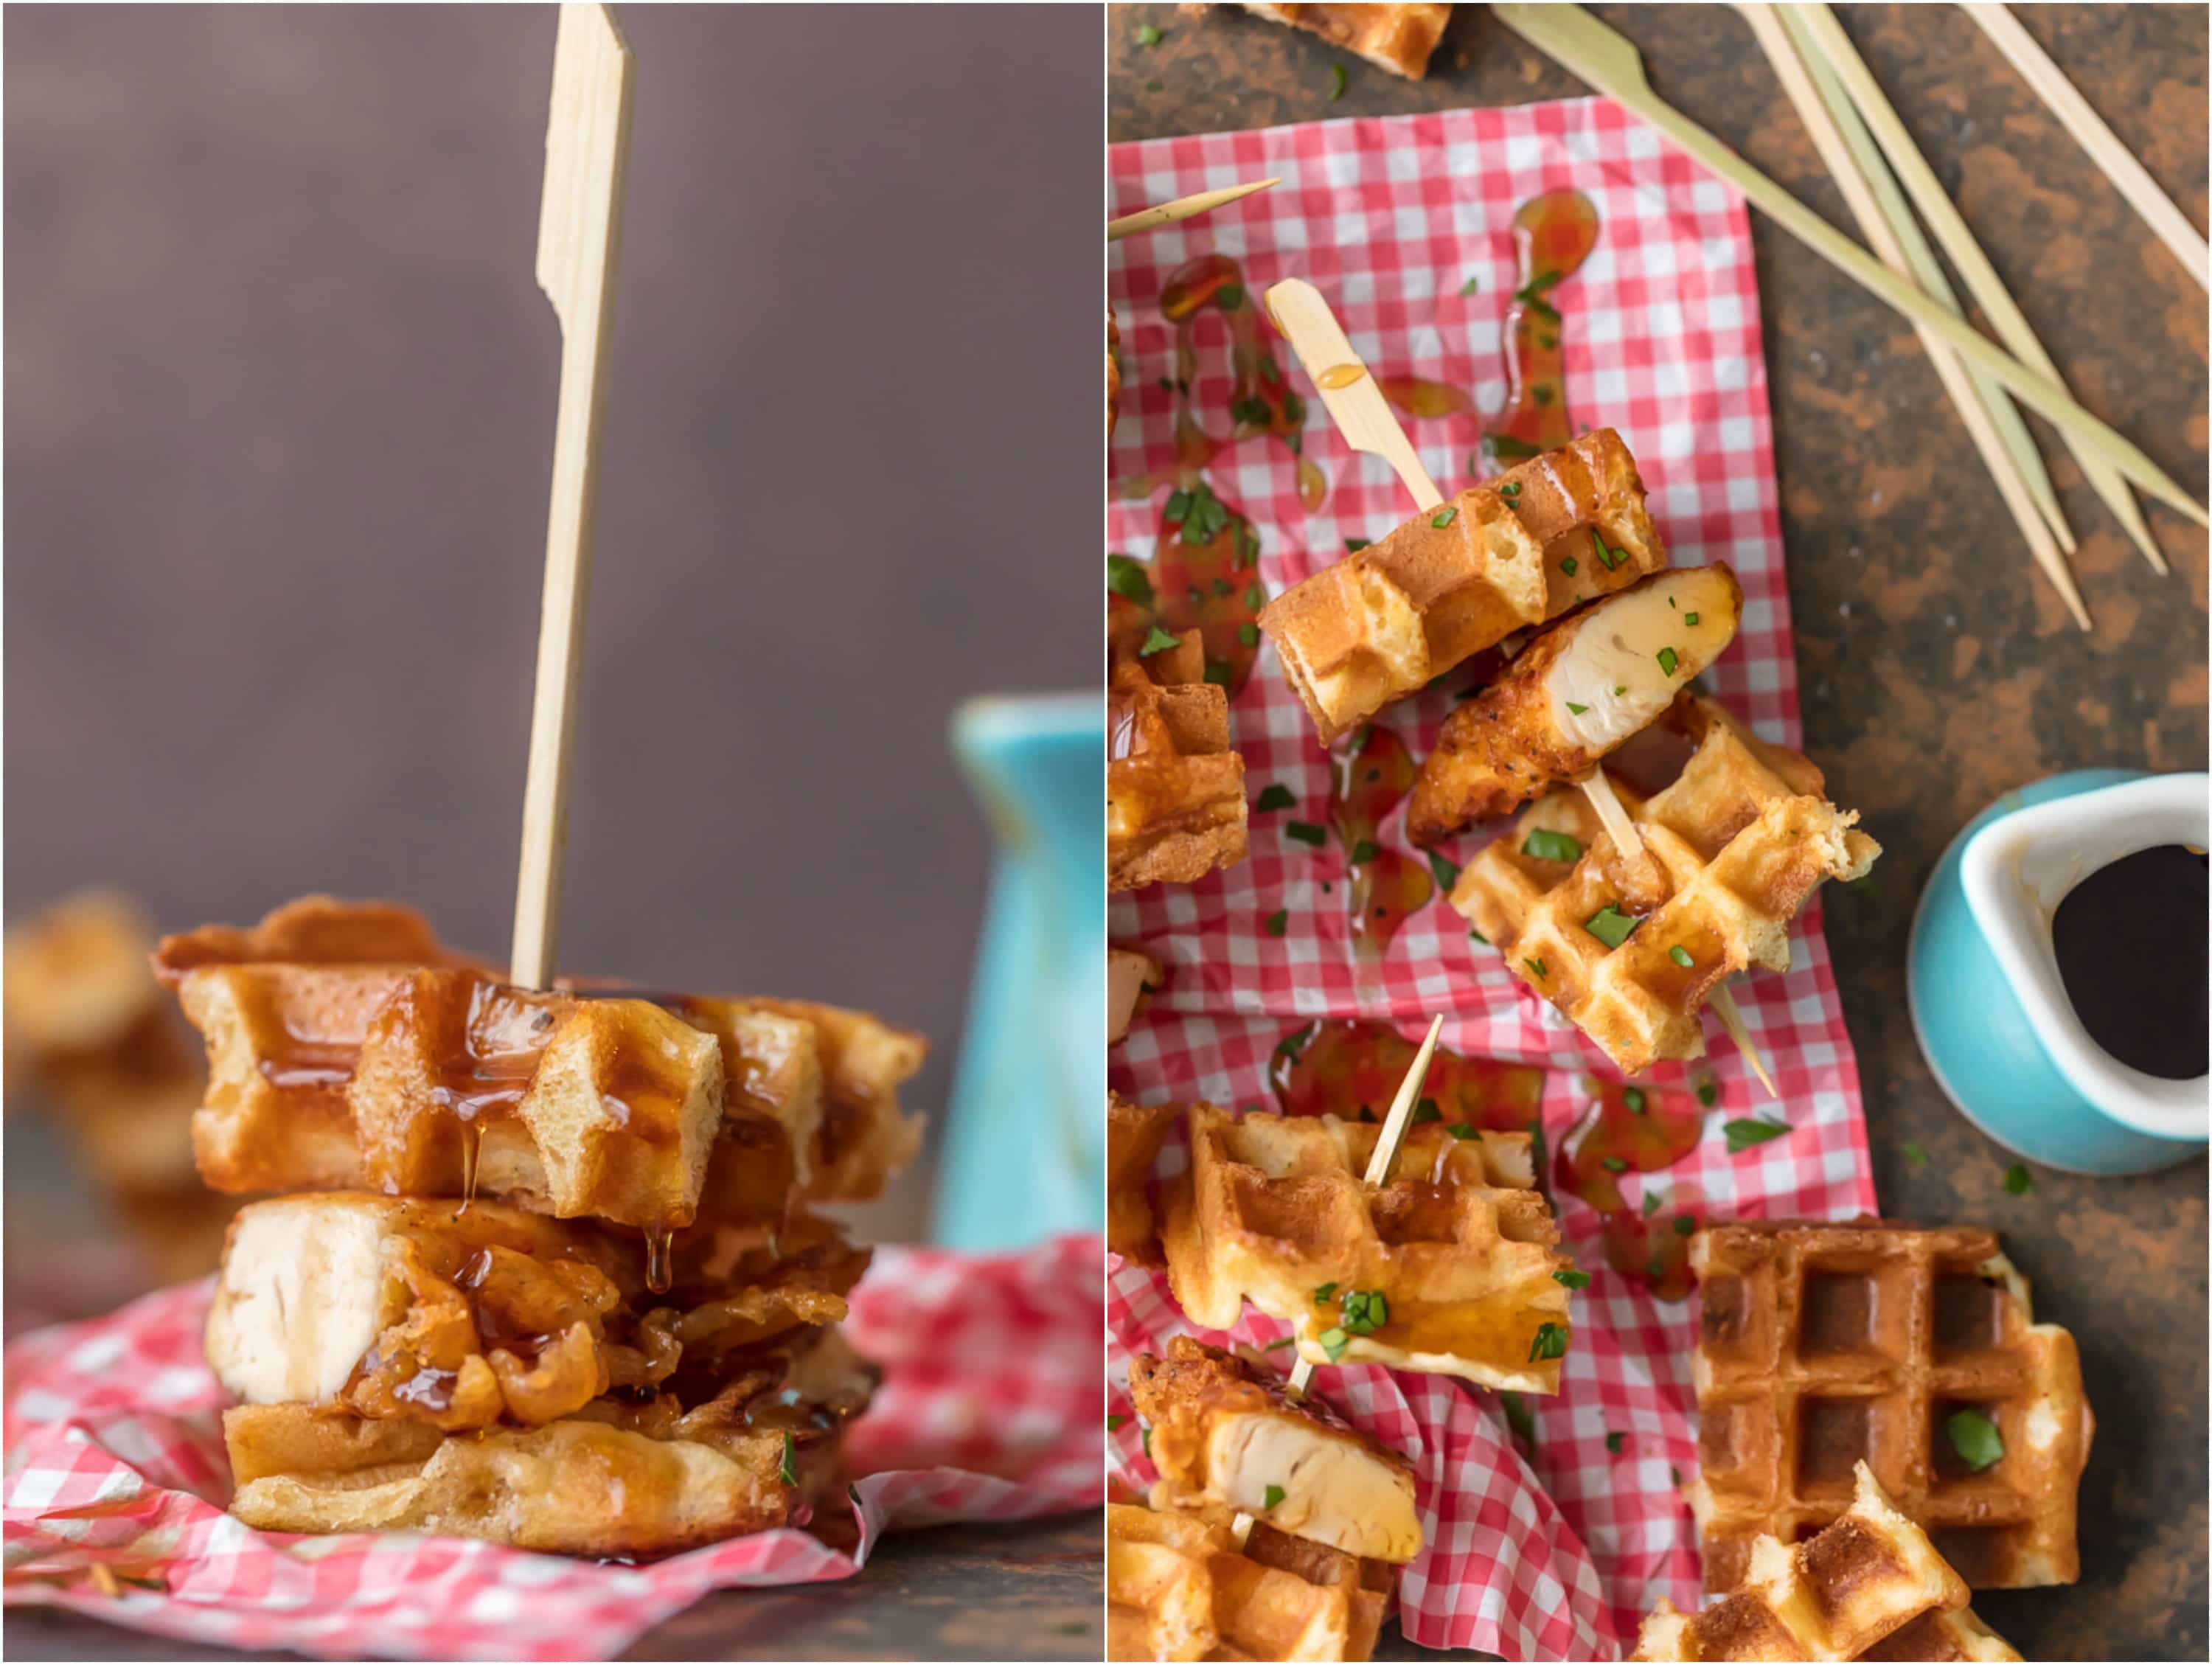 https://www.thecookierookie.com/wp-content/uploads/2017/12/mini-chicken-and-waffles-skewers-collage2.jpeg